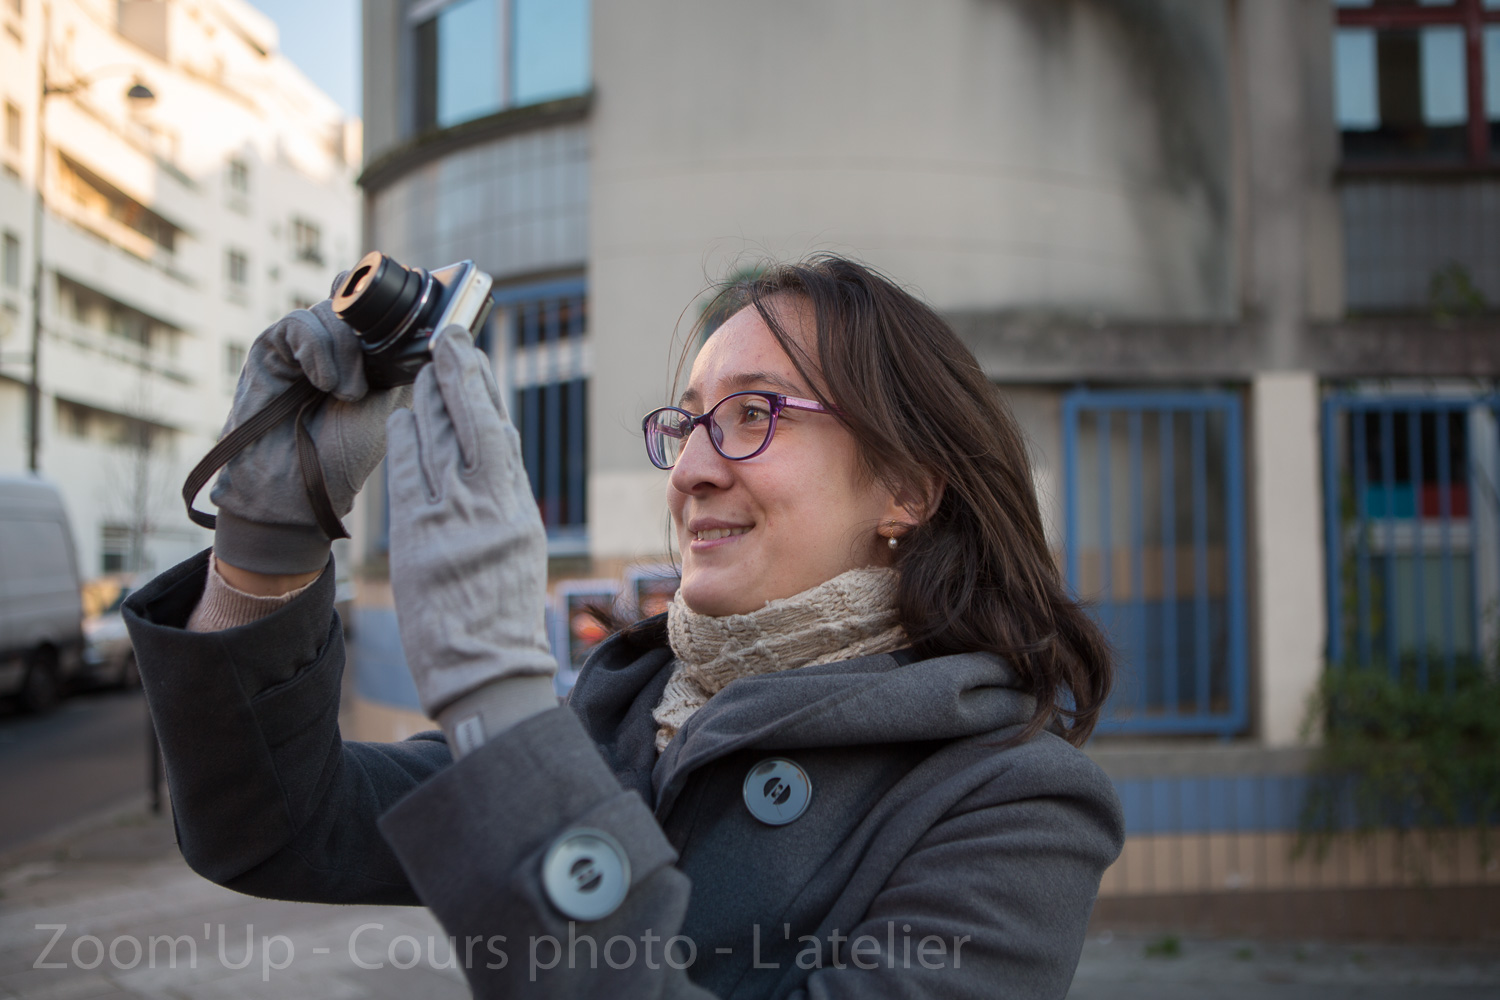 Zoom'Up - Cours photo - L'atelier;